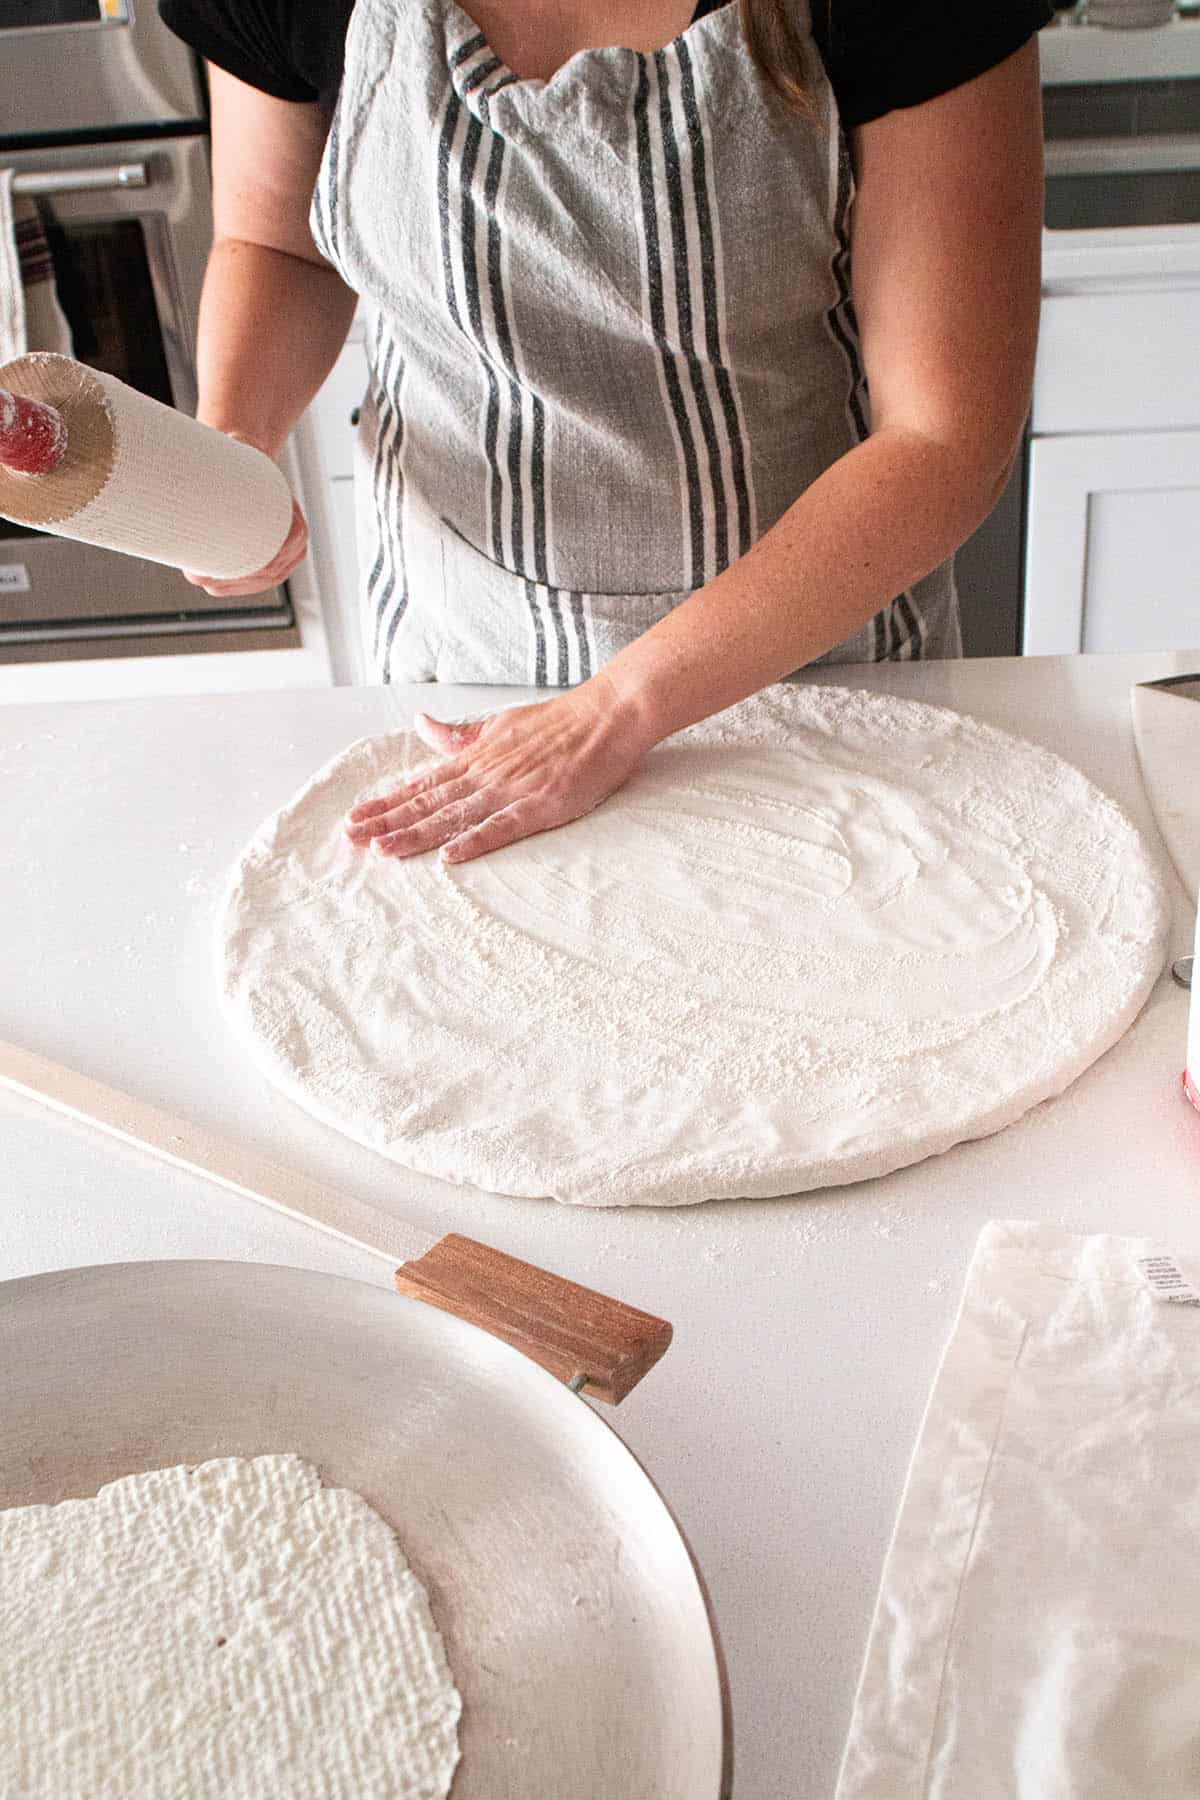 A pastry board with a baker spreading flour all over.